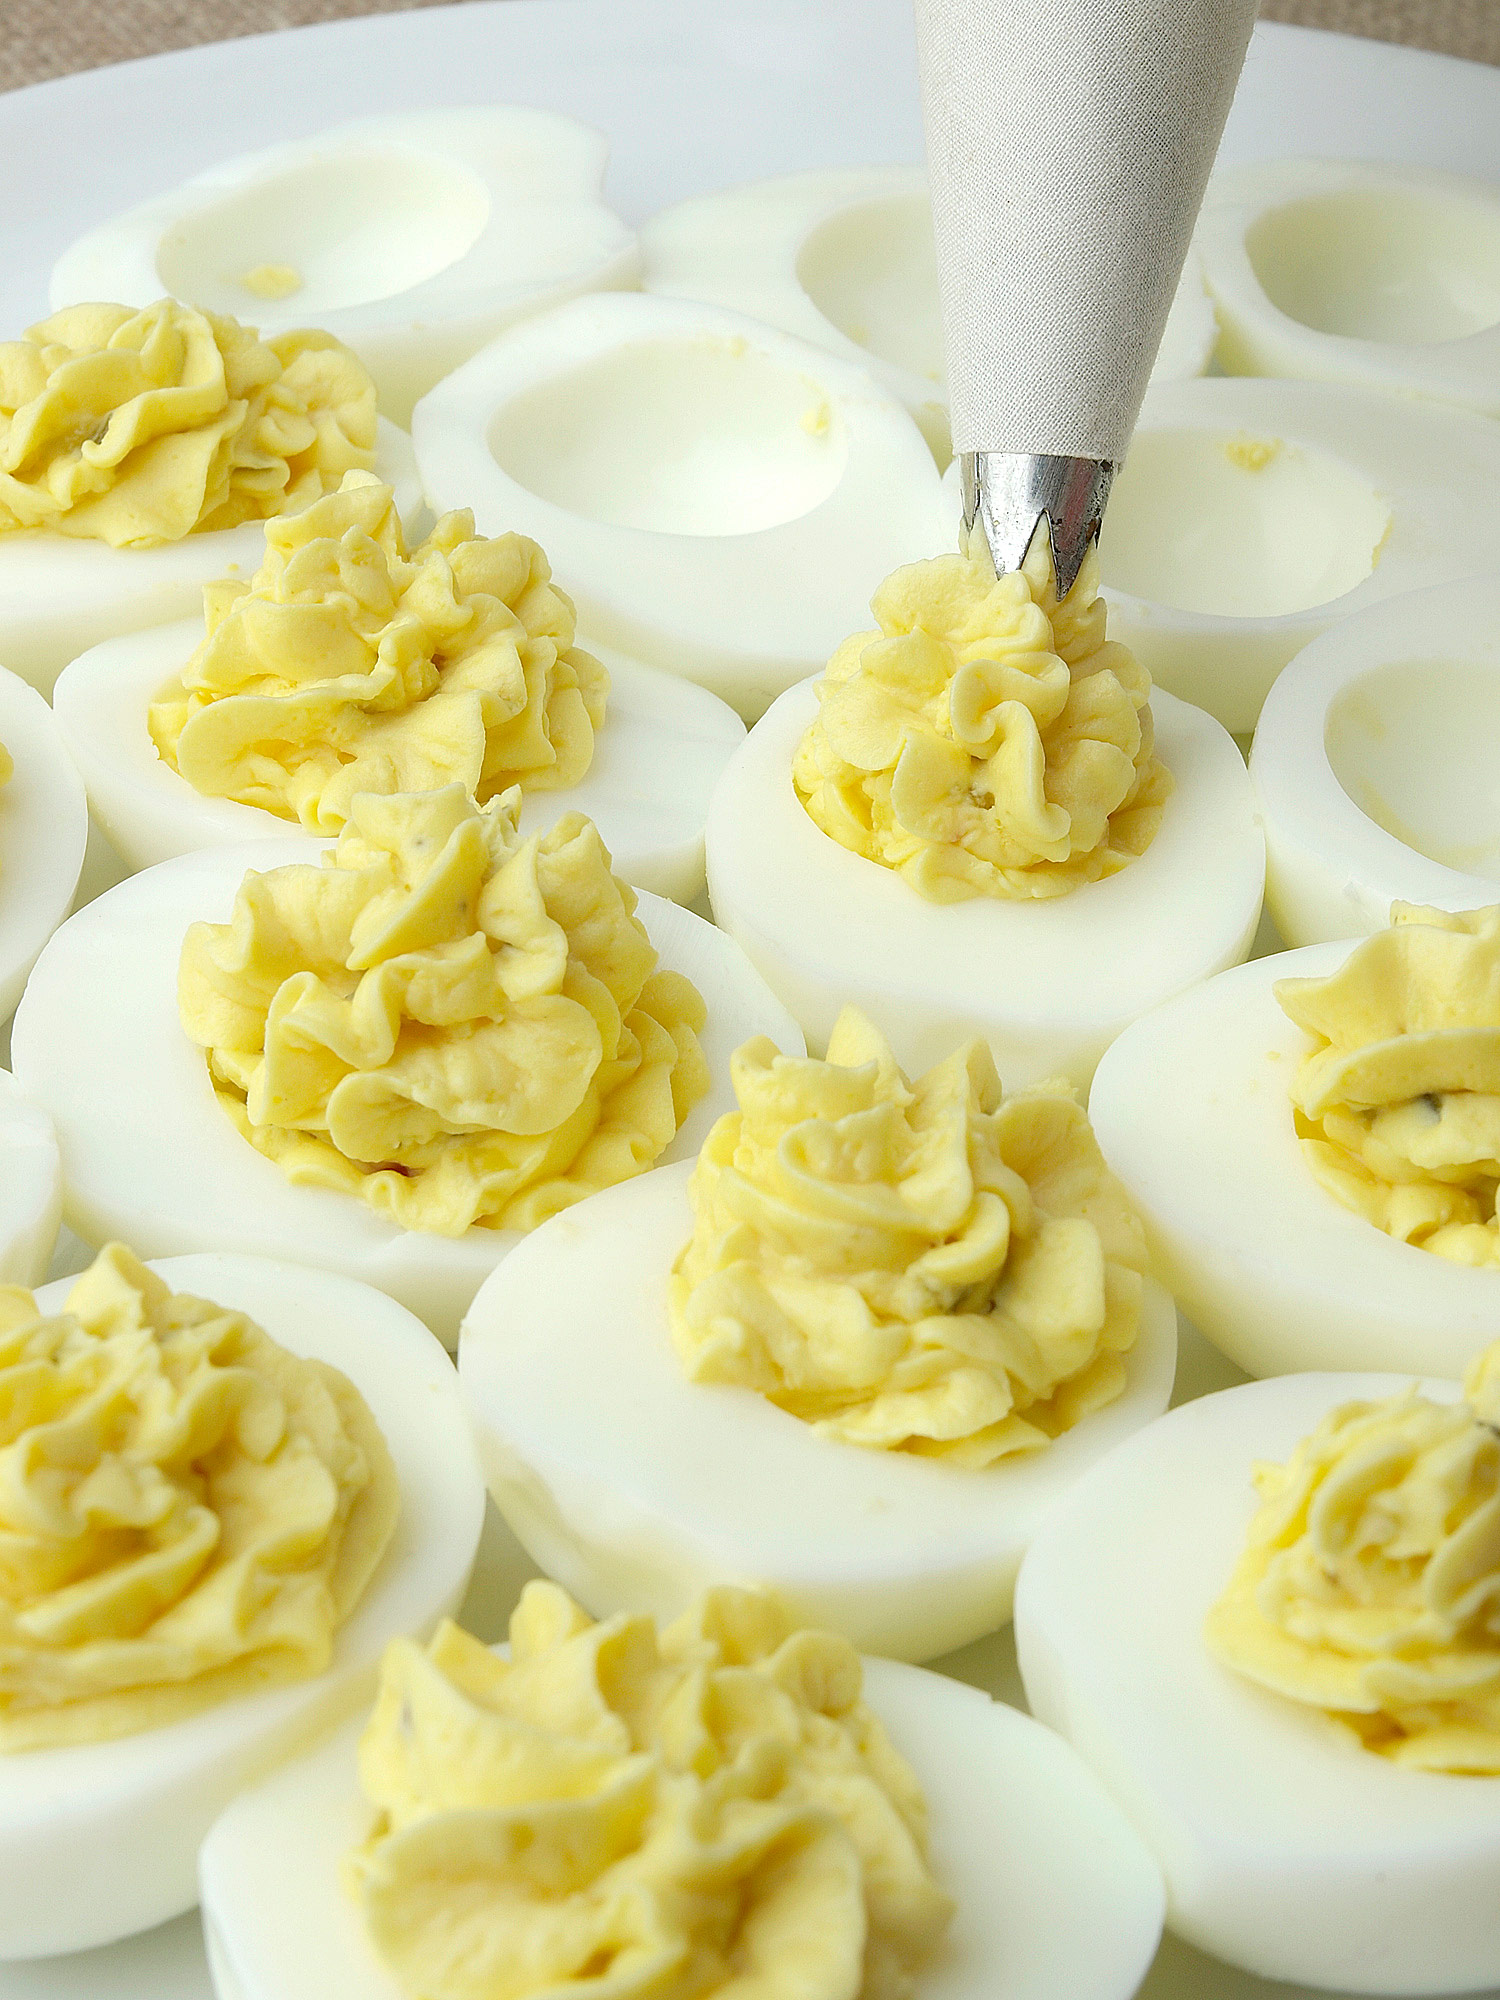 Piping yolk mixture into cooked egg white halves. 